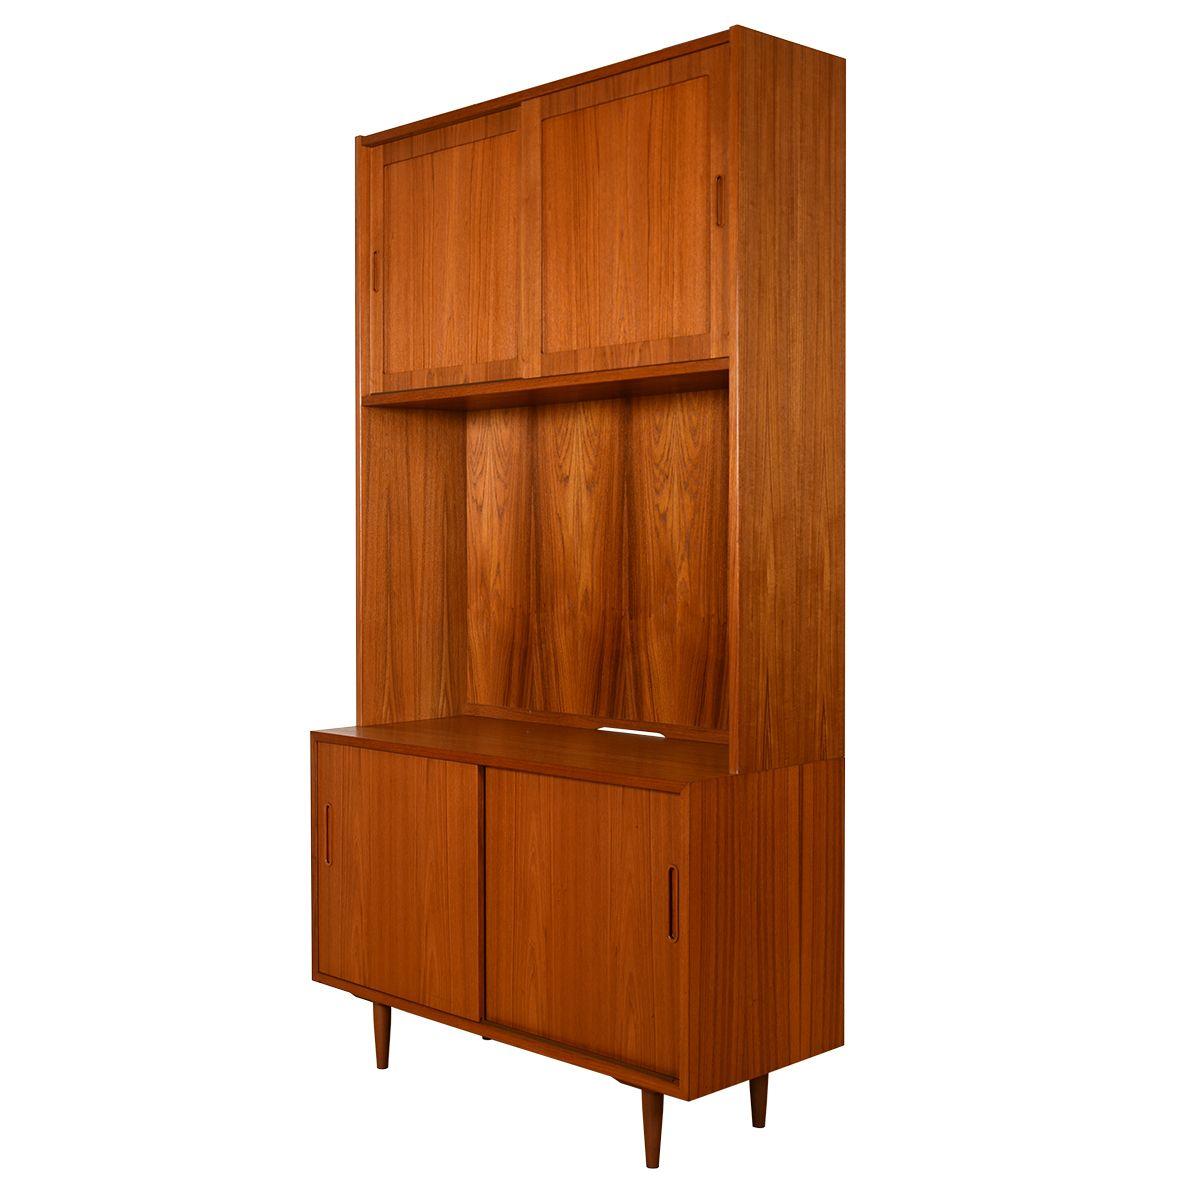 Lovely to look at, and further enhanced with many functional features.
A storage & display cabinet w: both upper & lower sliding door storage.
The lower cabinet has two sliding doors, a felt-lined shallow drawer, and adjustable shelves.

A wonderful